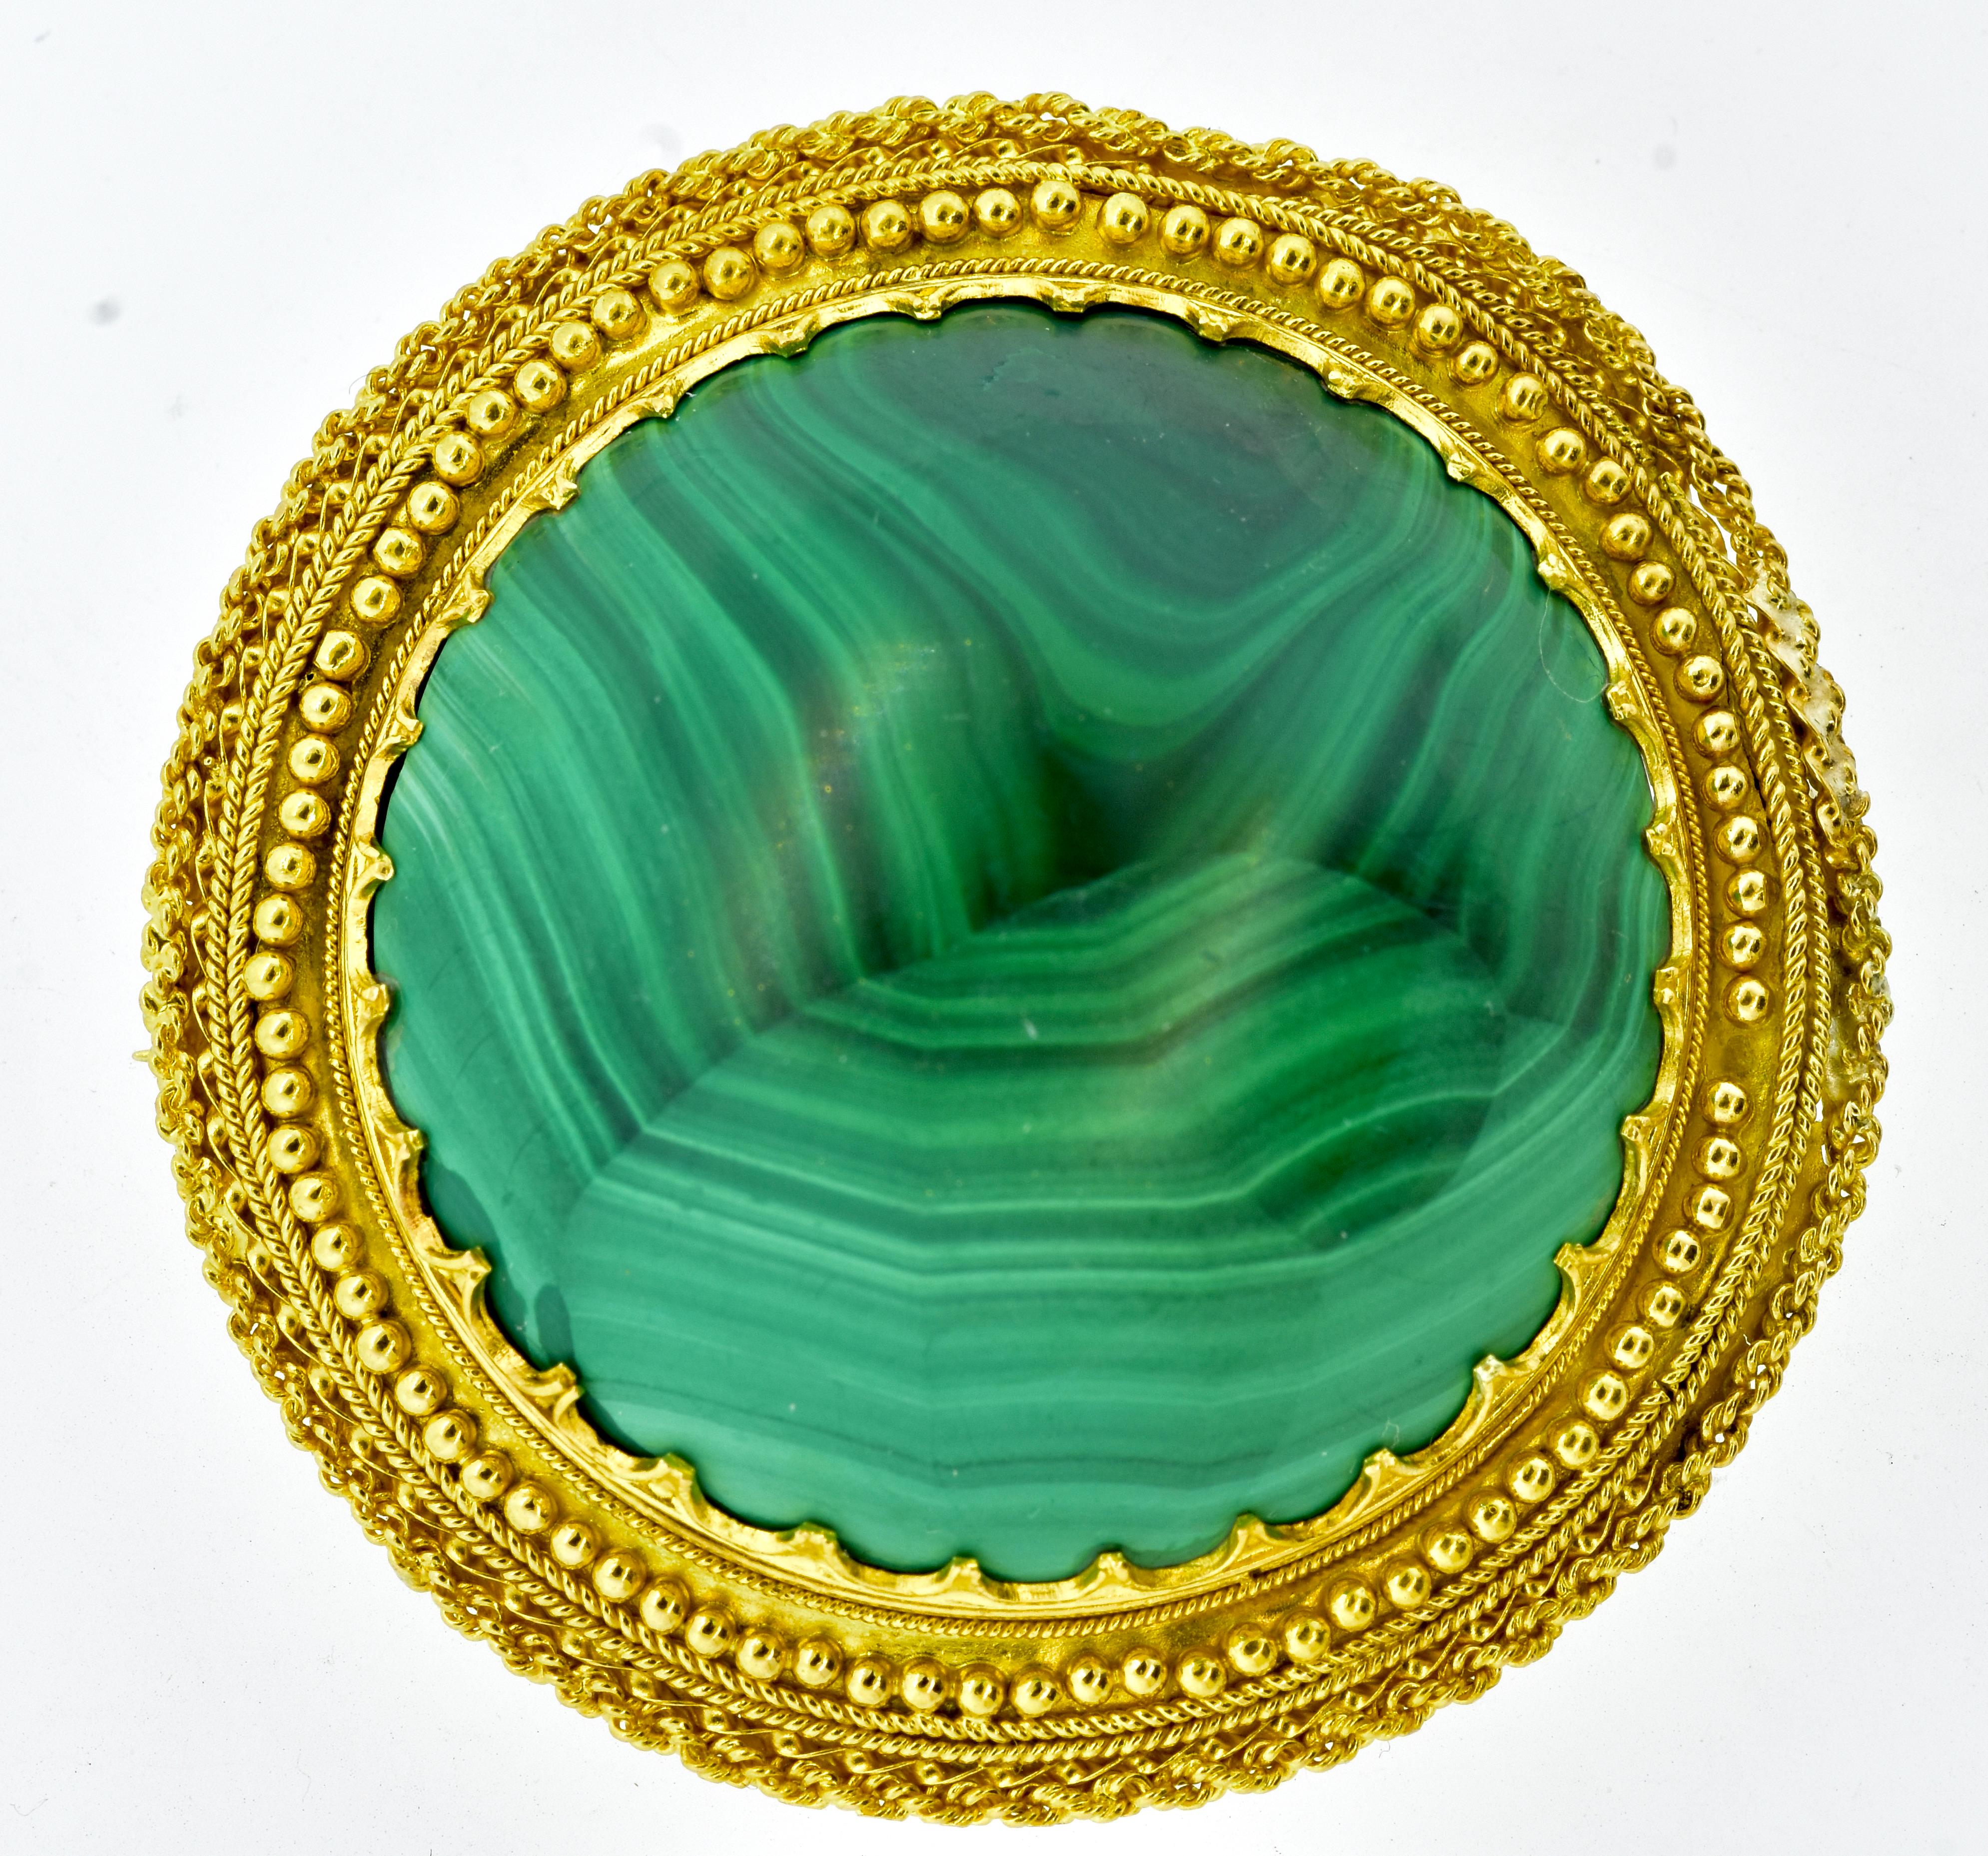 Antique 18K and Malachite large brooch, last quarter of the 19th century, this piece has wonderful Etruscan revival gold bead and wire work along the periphery on the large natural bright green Malachite held by ornate prongs.  This is an early hand